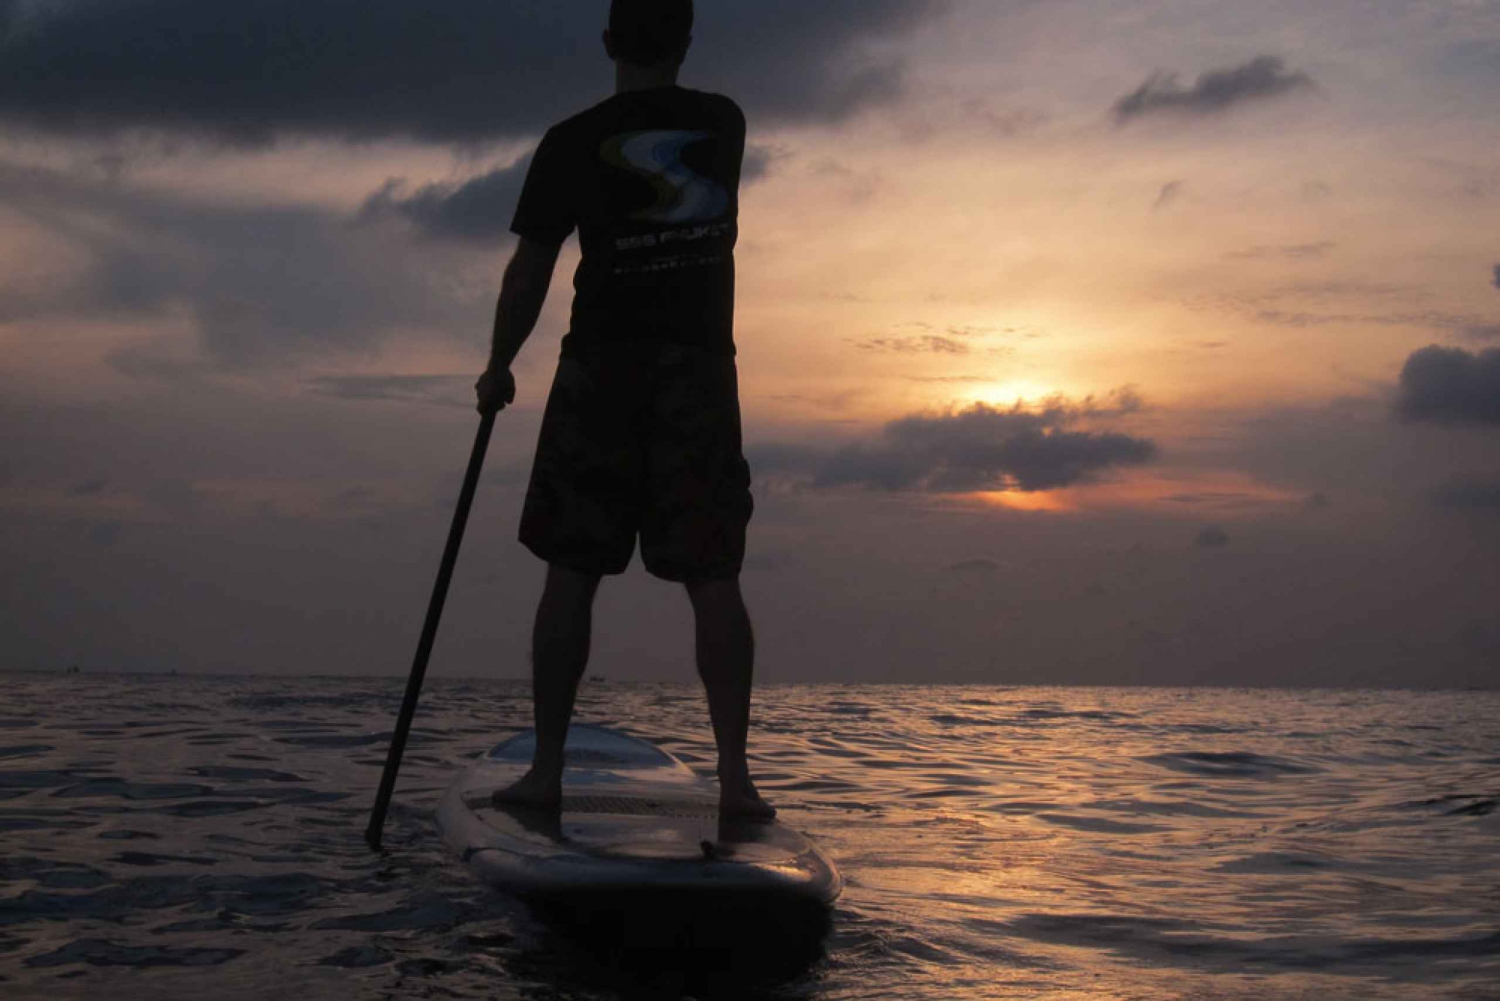 From Phuket: Stand Up Paddleboard Lesson